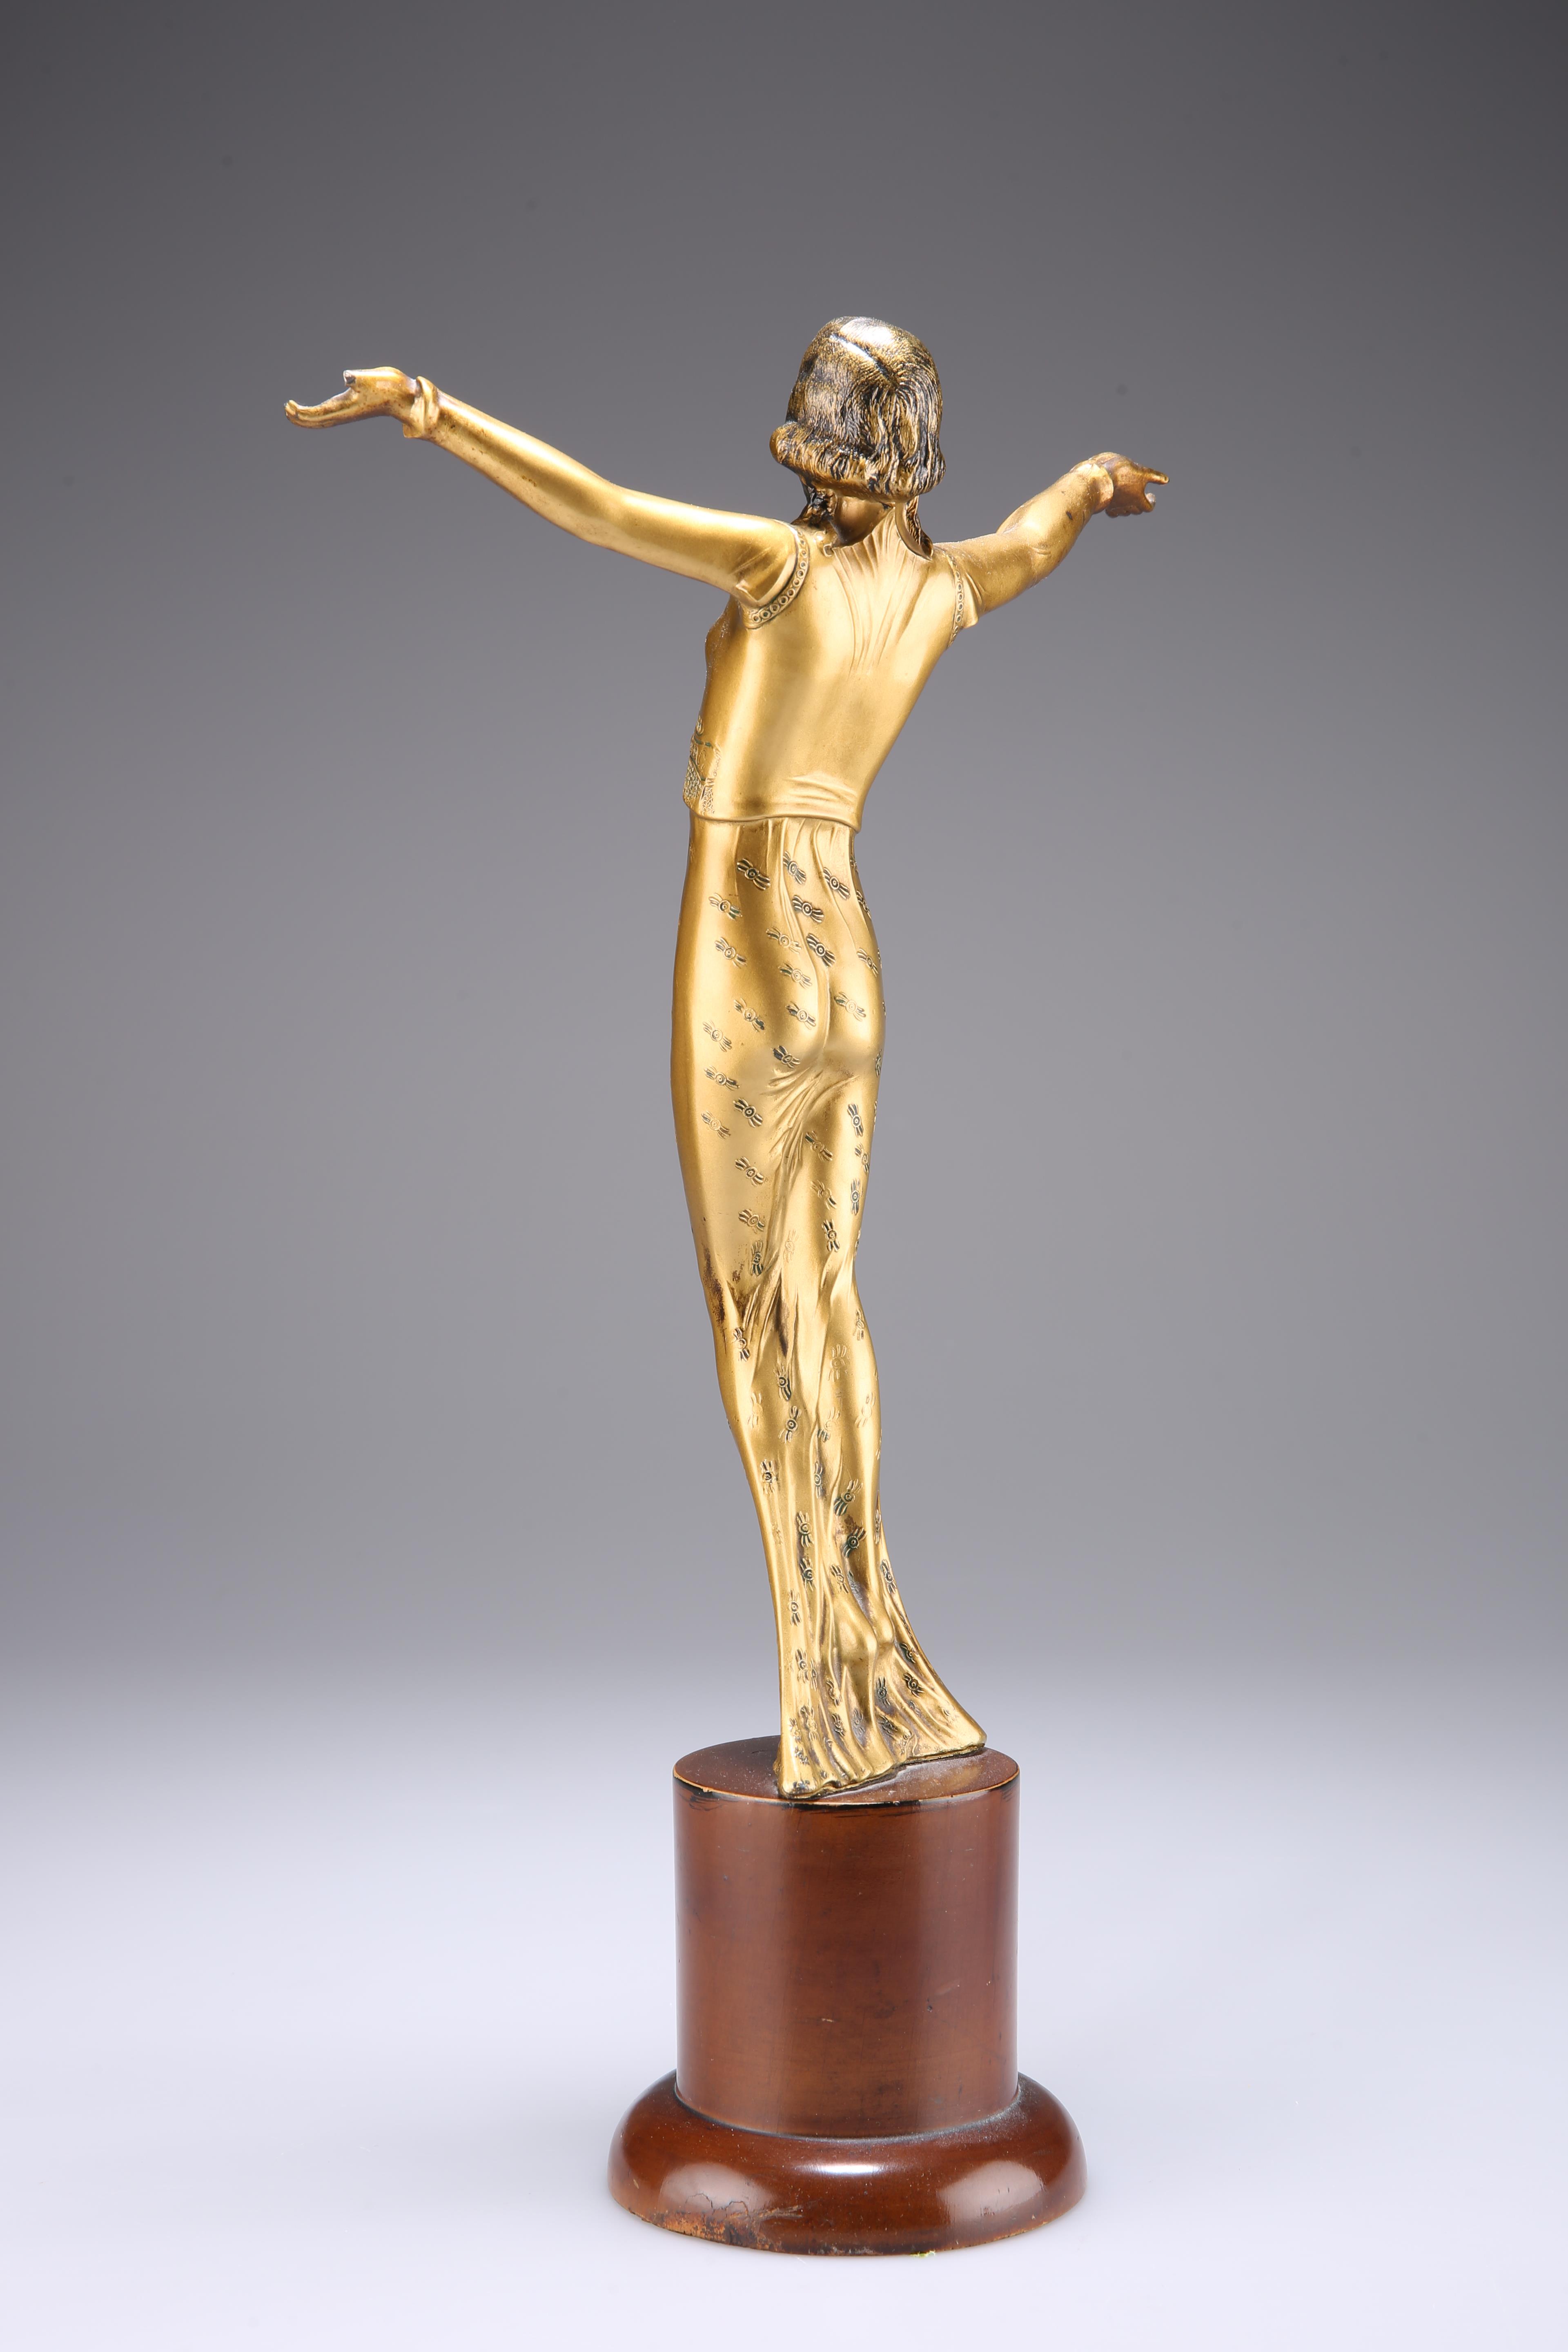 AN EARLY 20TH CENTURY GILT-METAL FIGURE OF A DANCER, IN THE ART DECO TASTE - Image 2 of 3